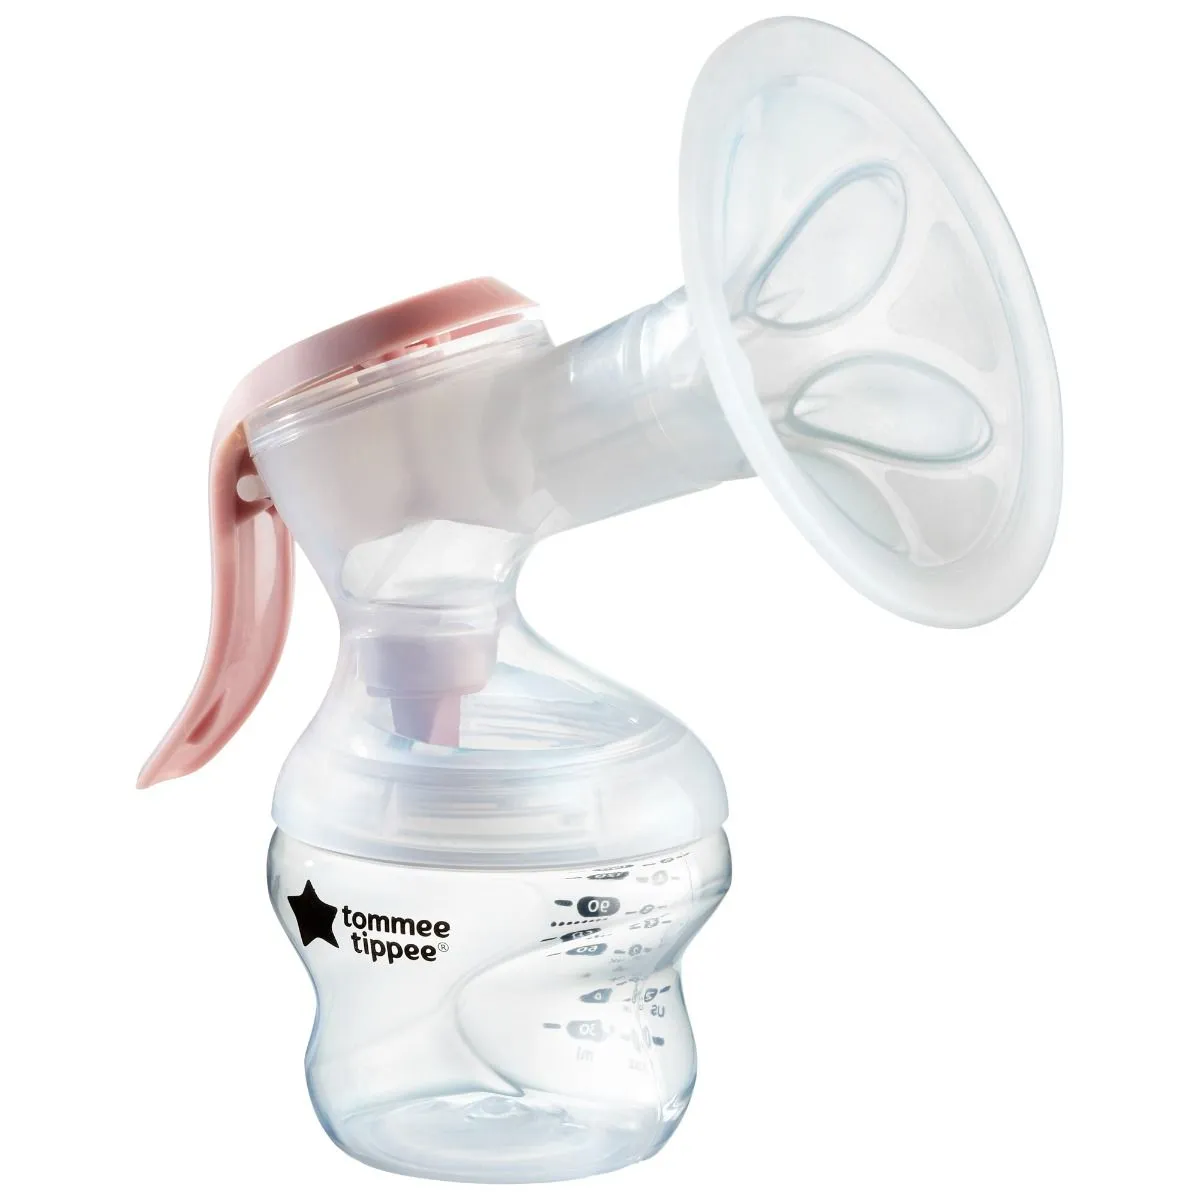 How to choose the Best Electric Breast Pump: The Ultimate Guide